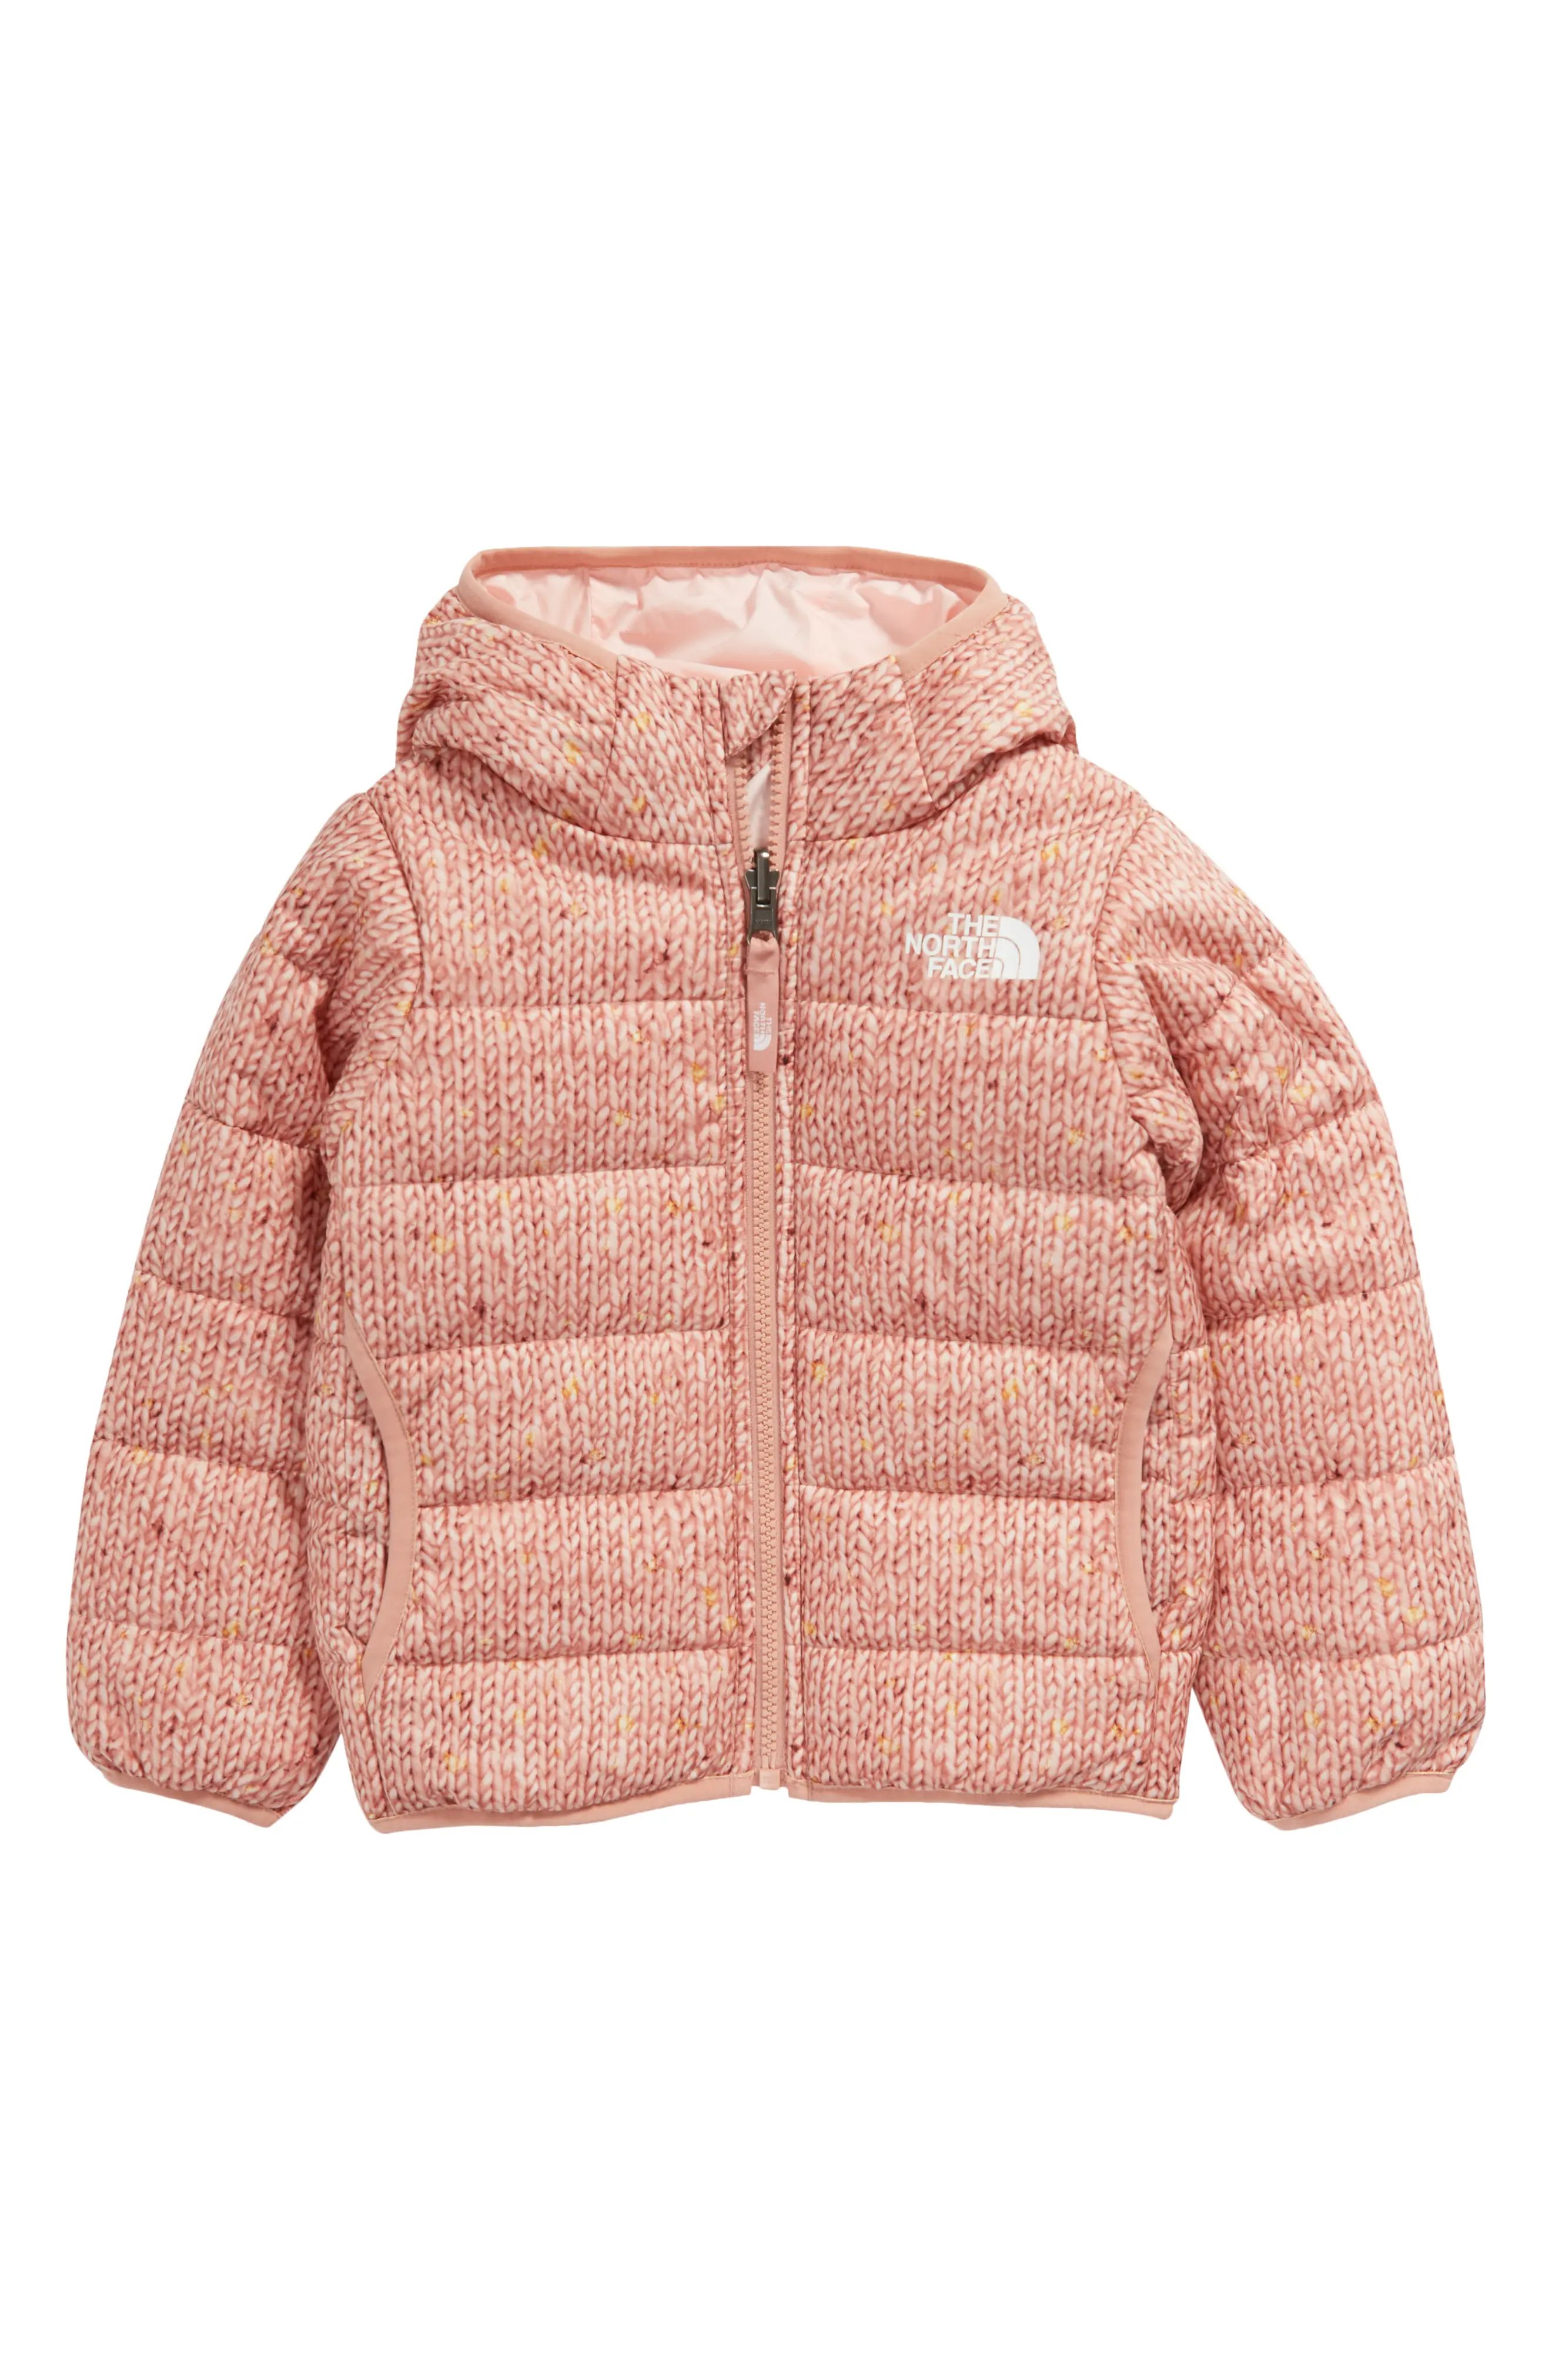 Toddler Girl's The North Face Perrito Reversible Water Repellent Hooded Jacket, Size 6T - Pink | Nordstrom